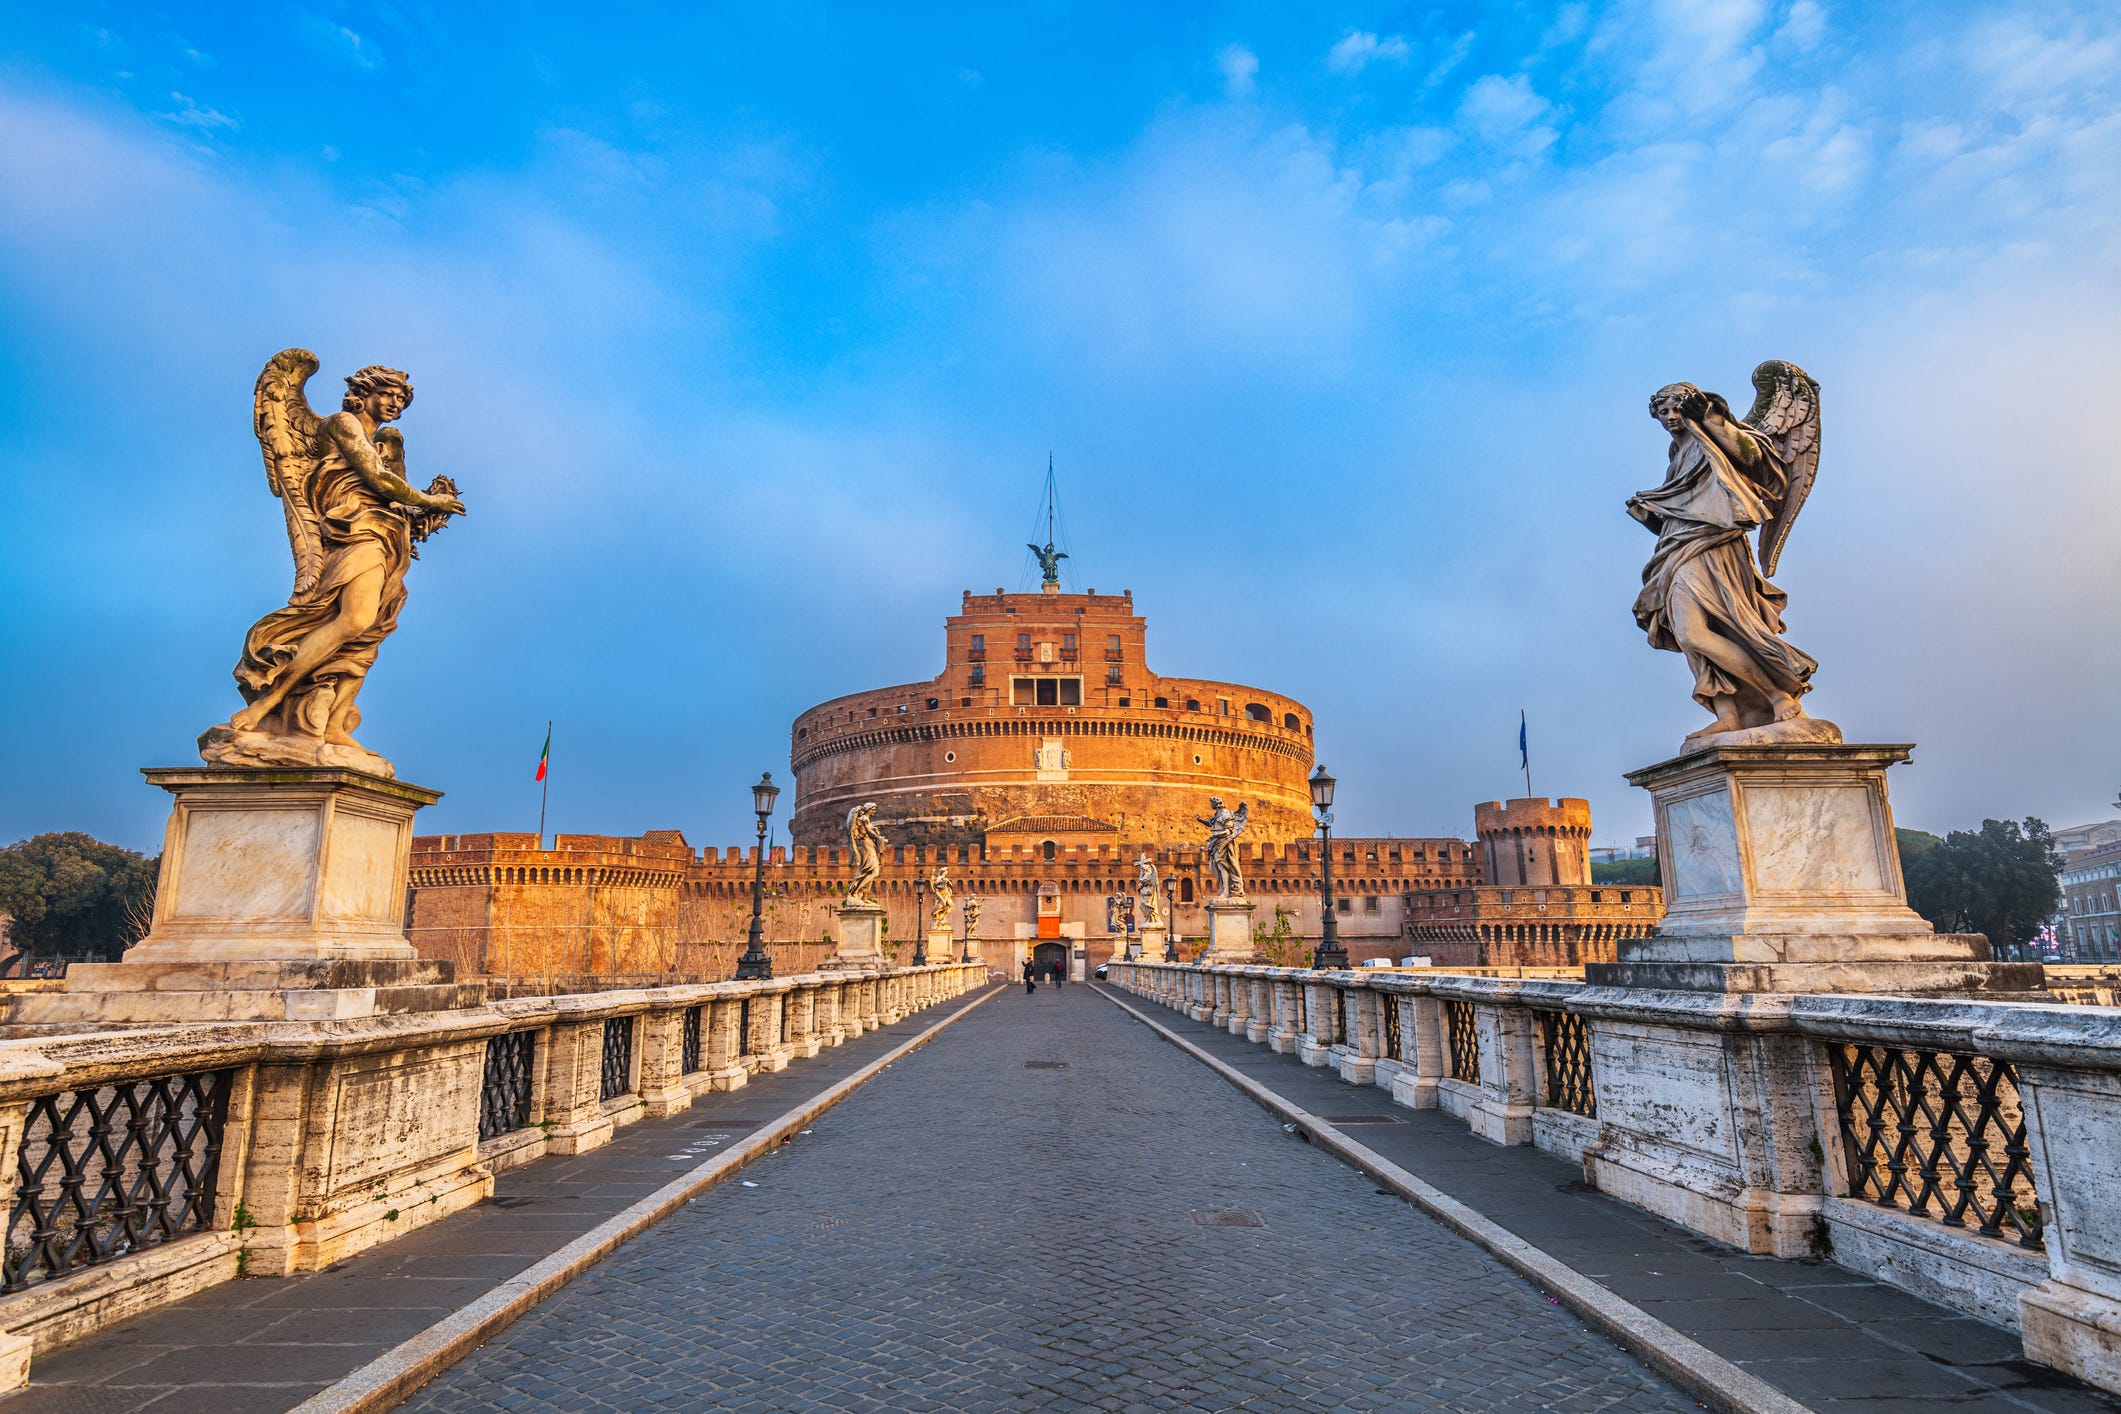 <p>Towering over the Tiber River just outside of the Vatican City is <a href="http://castelsantangelo.beniculturali.it/">Castel Sant' Angelo</a>. The ancient structure was originally built as a mausoleum for the Roman Emperor Hadrian around 139 CE.</p><p>Over the centuries it was used as a fortress, military barracks, and a prison, the remains of which can still be seen inside today.</p><p>I've been visiting the site since I was little, and love the panoramic view of the Tiber River and the dome of Saint Peter's Basilica from its top, especially at sunset. </p><p>I also enjoy the structure's small, open-air café and restaurant overlooking the scenery, which is ideal for those who may need a break from all the sightseeing.</p>